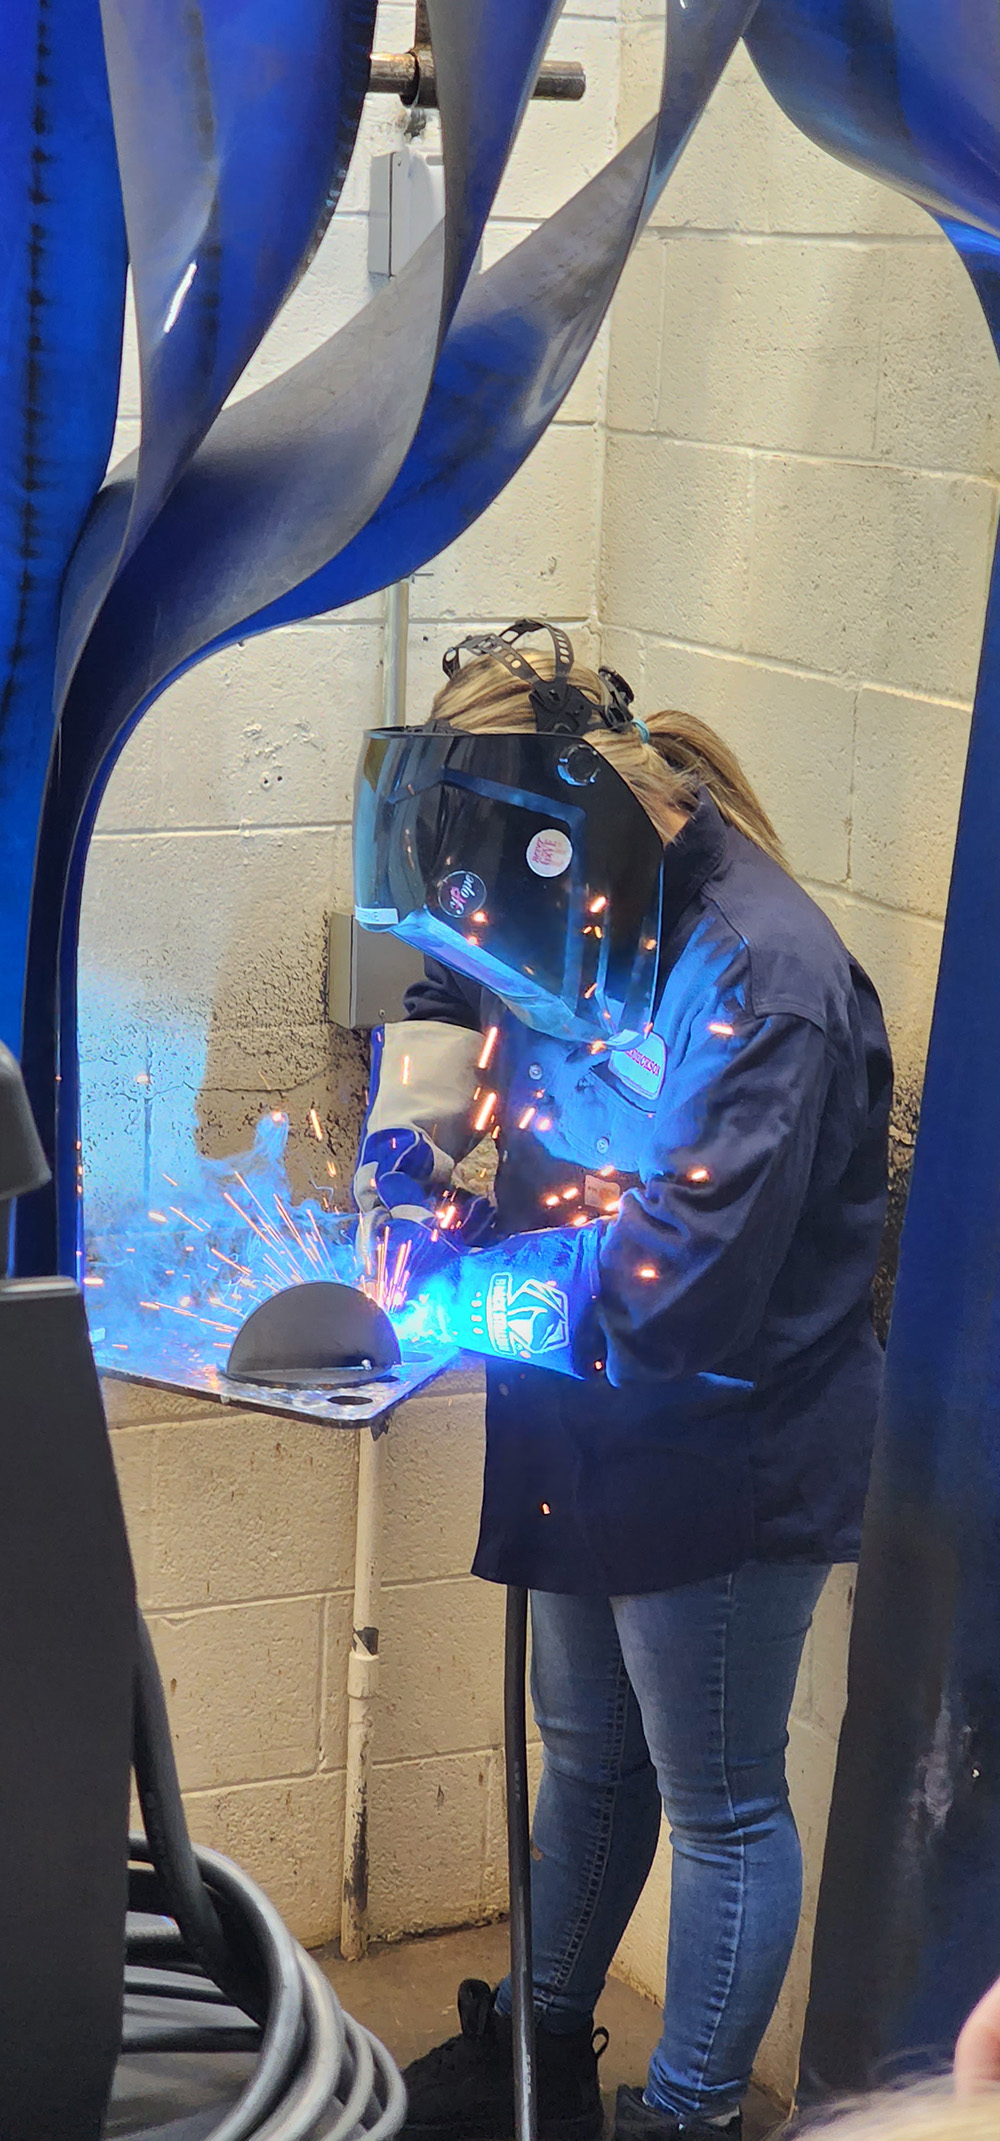 Student welding with the welding protection equipment while sparks and blue light shines.